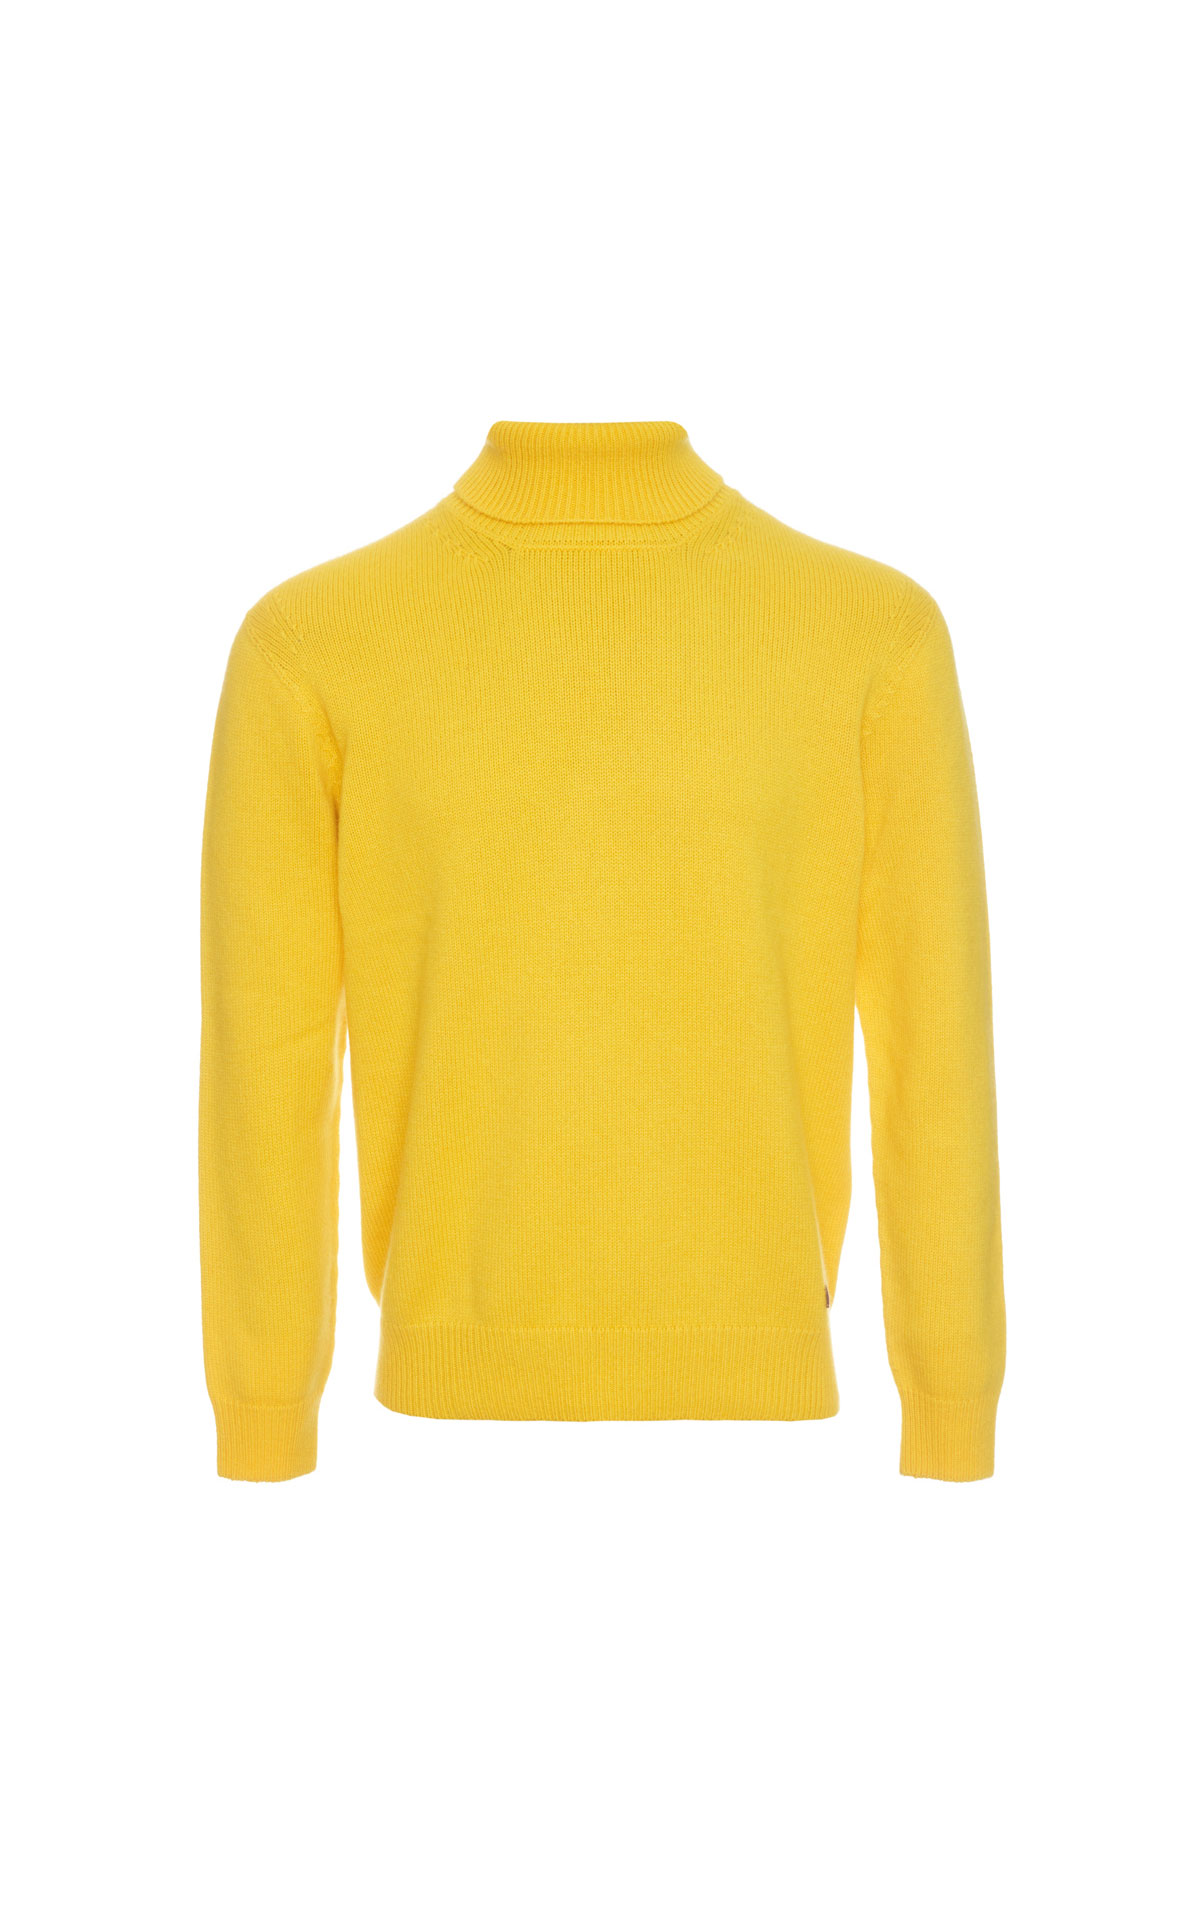 Brioni Yellow cashmere roll neck from Bicester Village